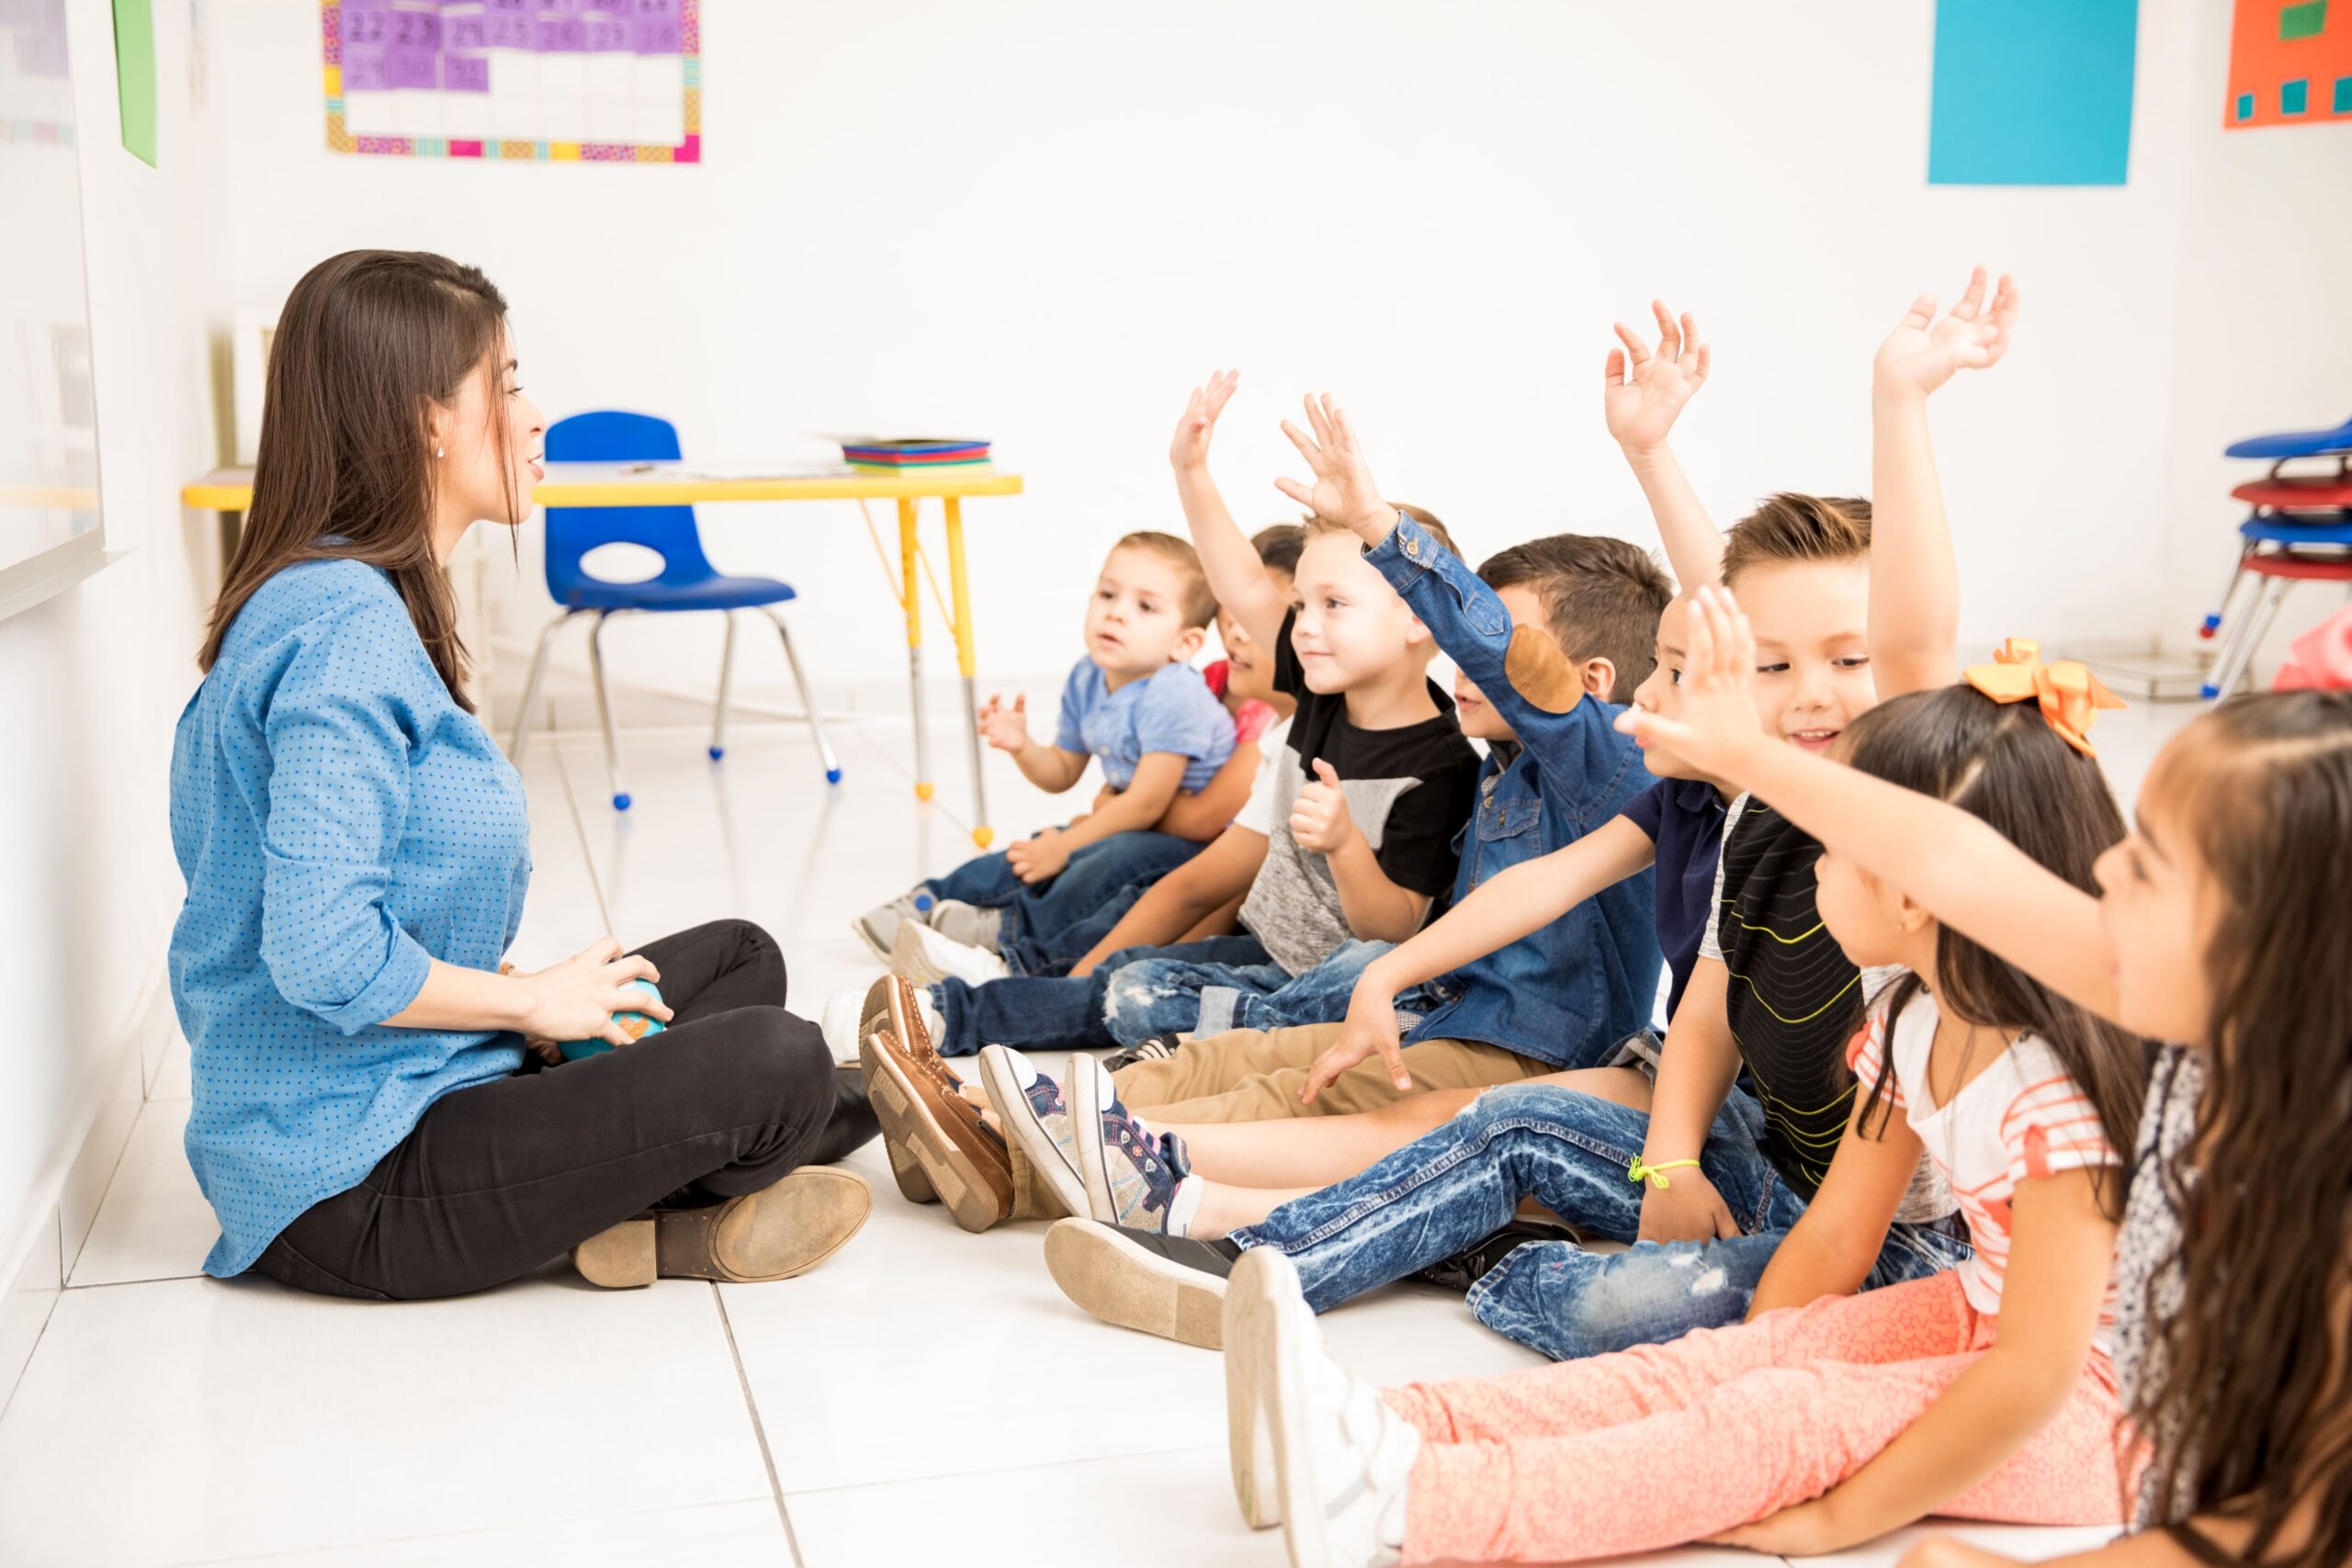 profile-view-group-preschool-students-raising-their-hands-trying-participate-school